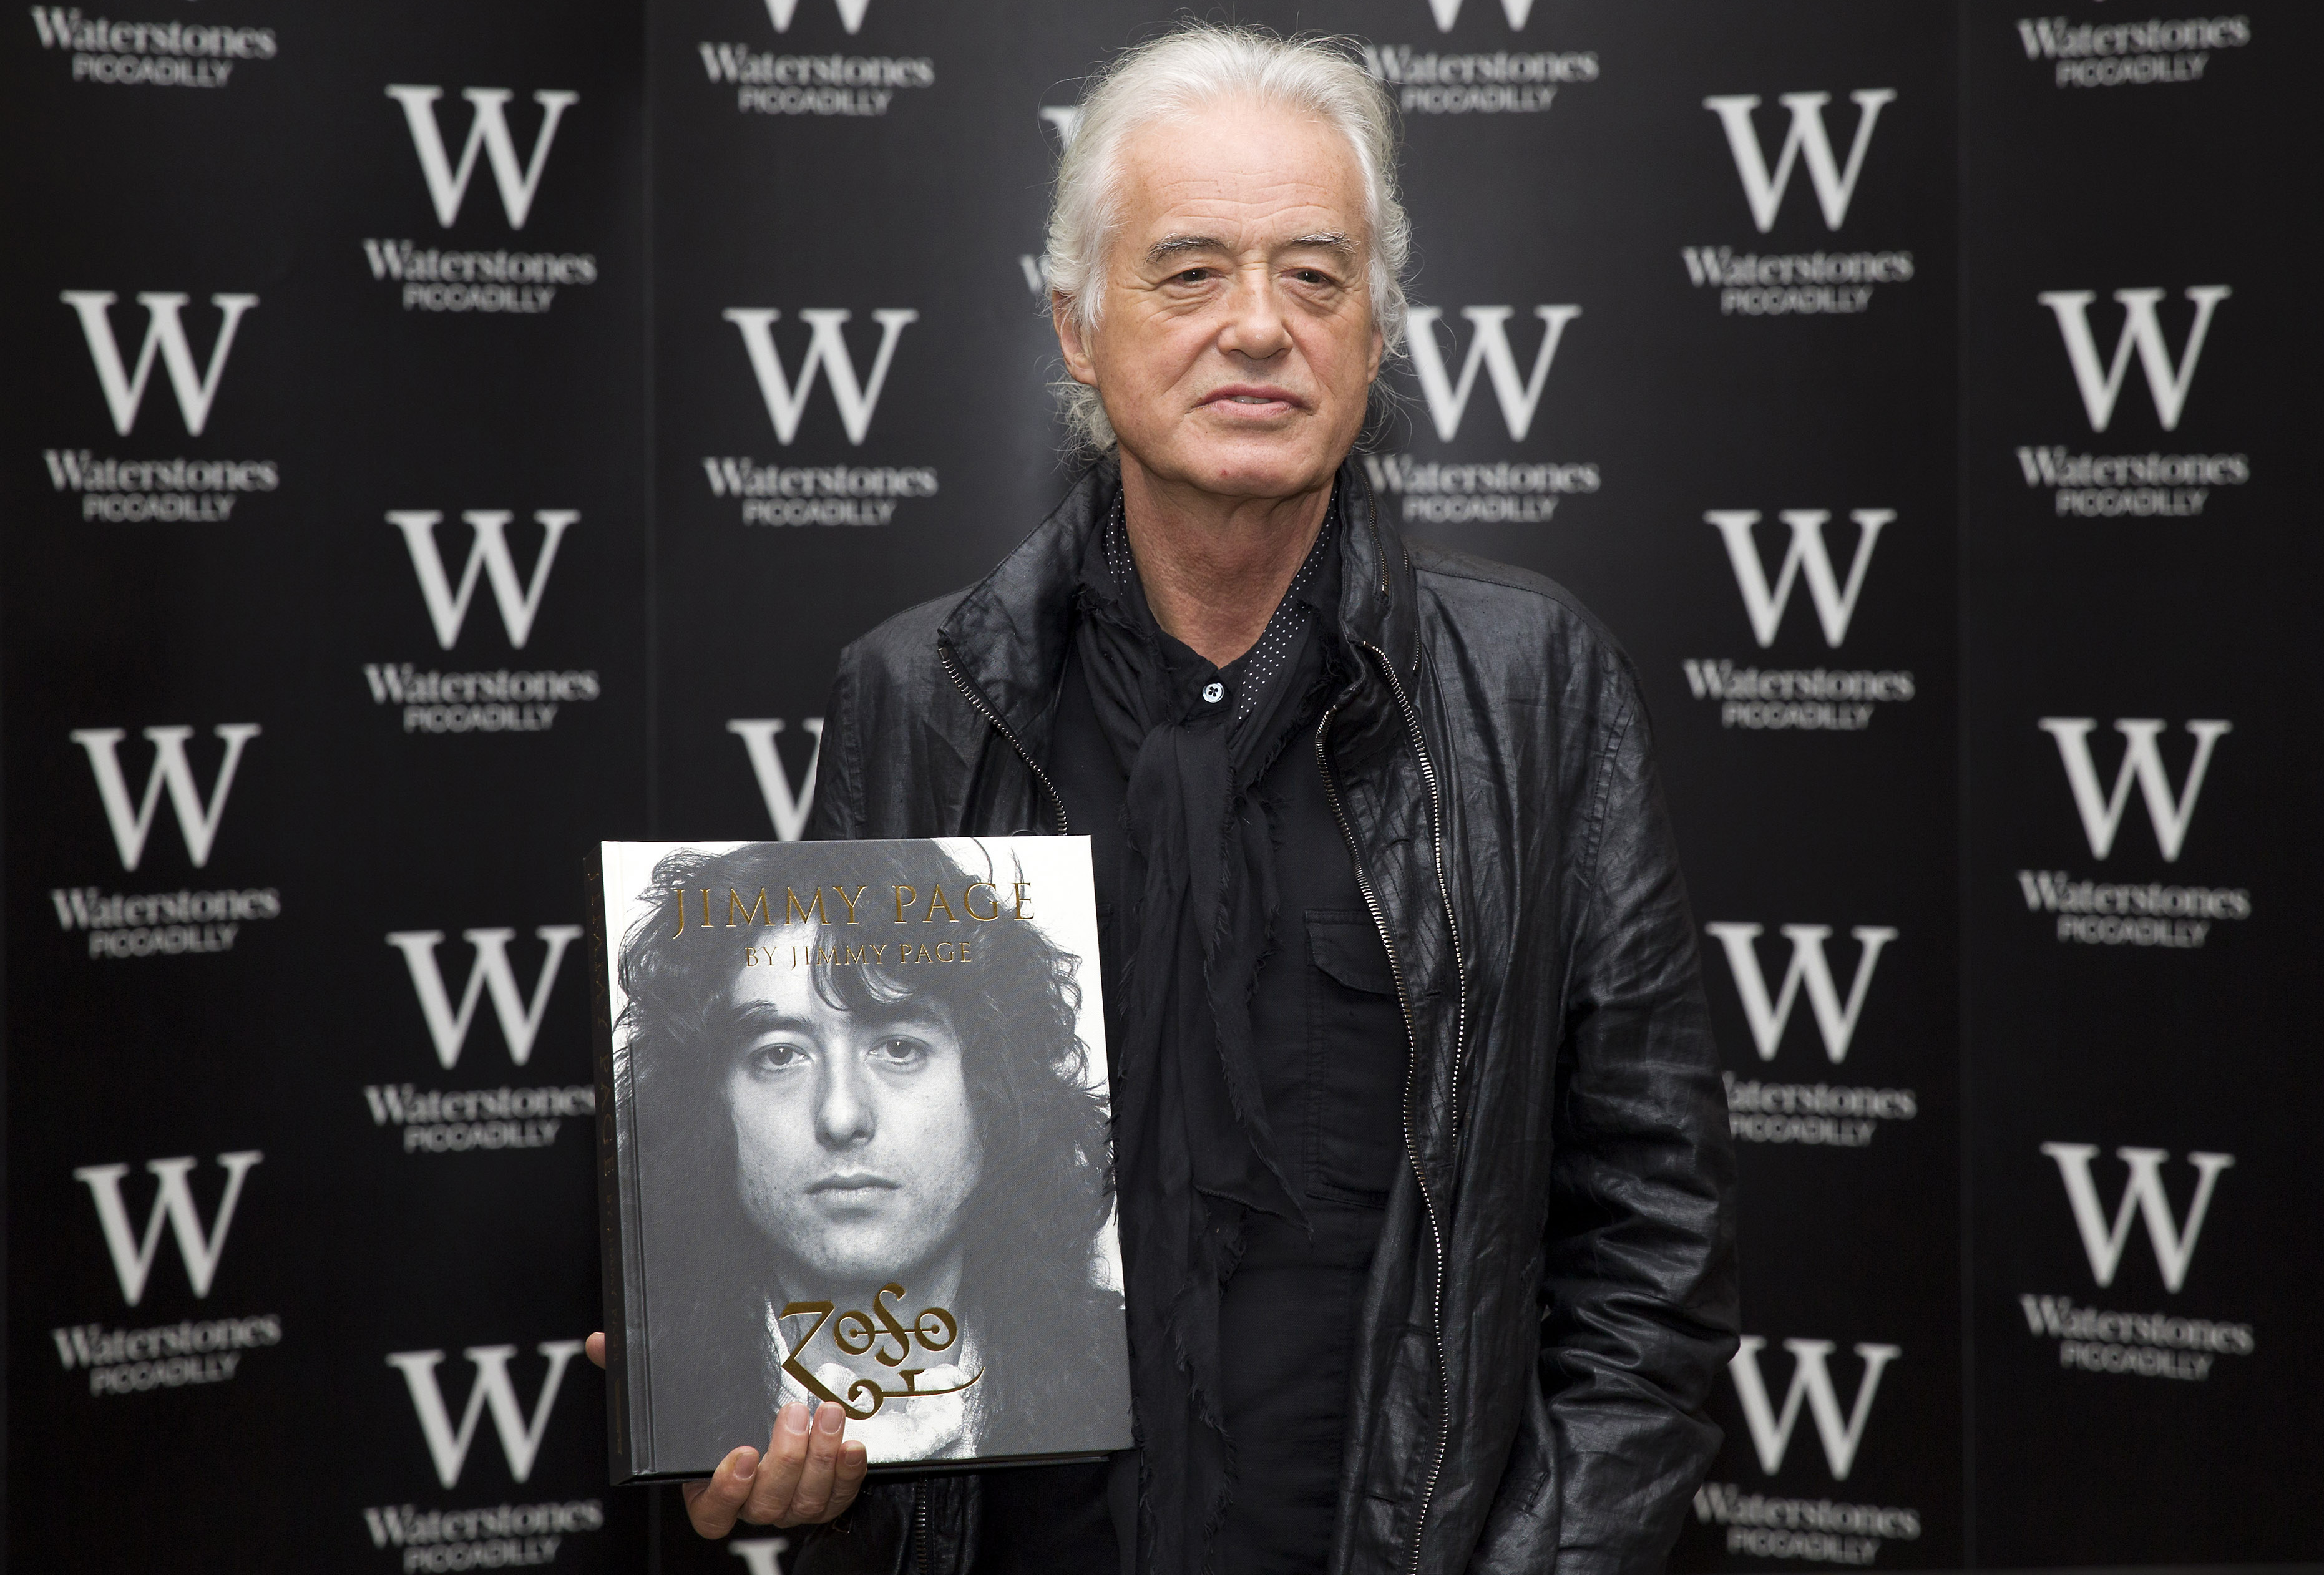 (FILES) This file photo taken on December 02, 2014 shows British musician Jimmy Page poses for pictures before signing his new book entitled 'Jimmy Page by Jimmy Page' at a Waterstones book shop in central London. Led Zeppelin's Jimmy Page and Robert Plant will appear in court on June 14, 2016 to defend "Stairway to Heaven," one of the most recognizable songs in rock history, from accusations of plagiarism.  / AFP PHOTO / JUSTIN TALLIS